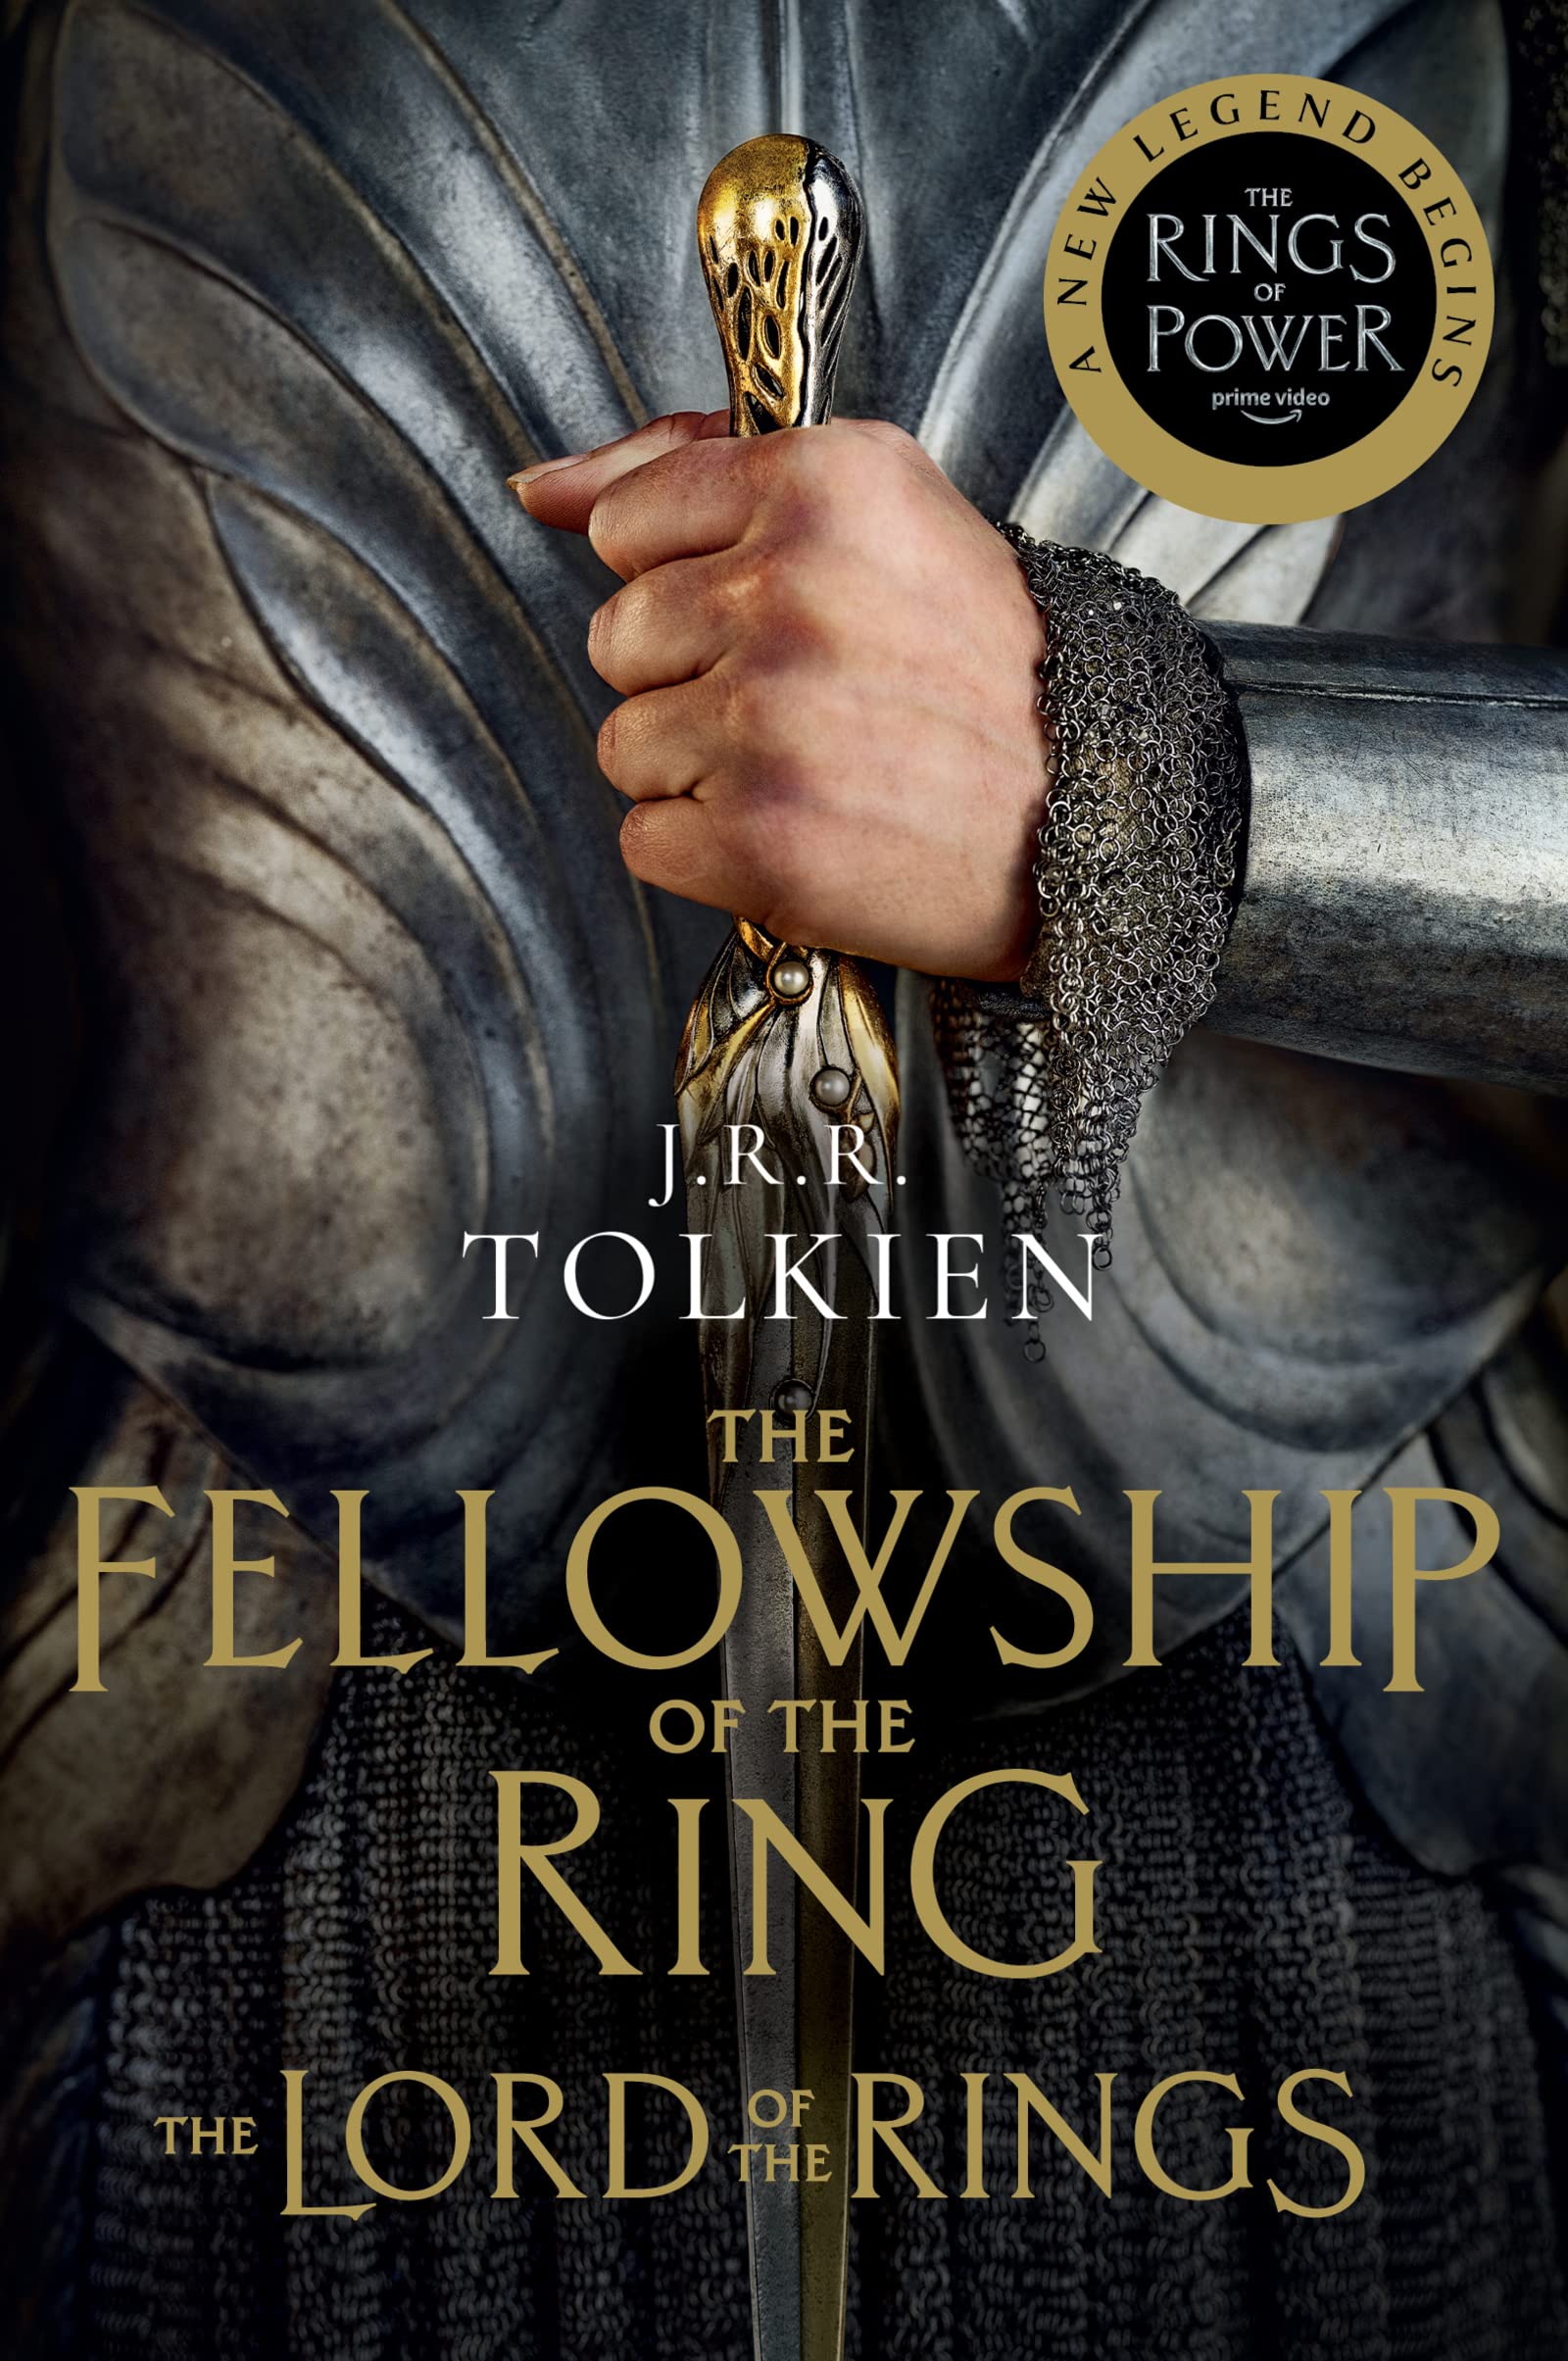 The Lord Of The Ring 1-The Fellowship Of The Ring